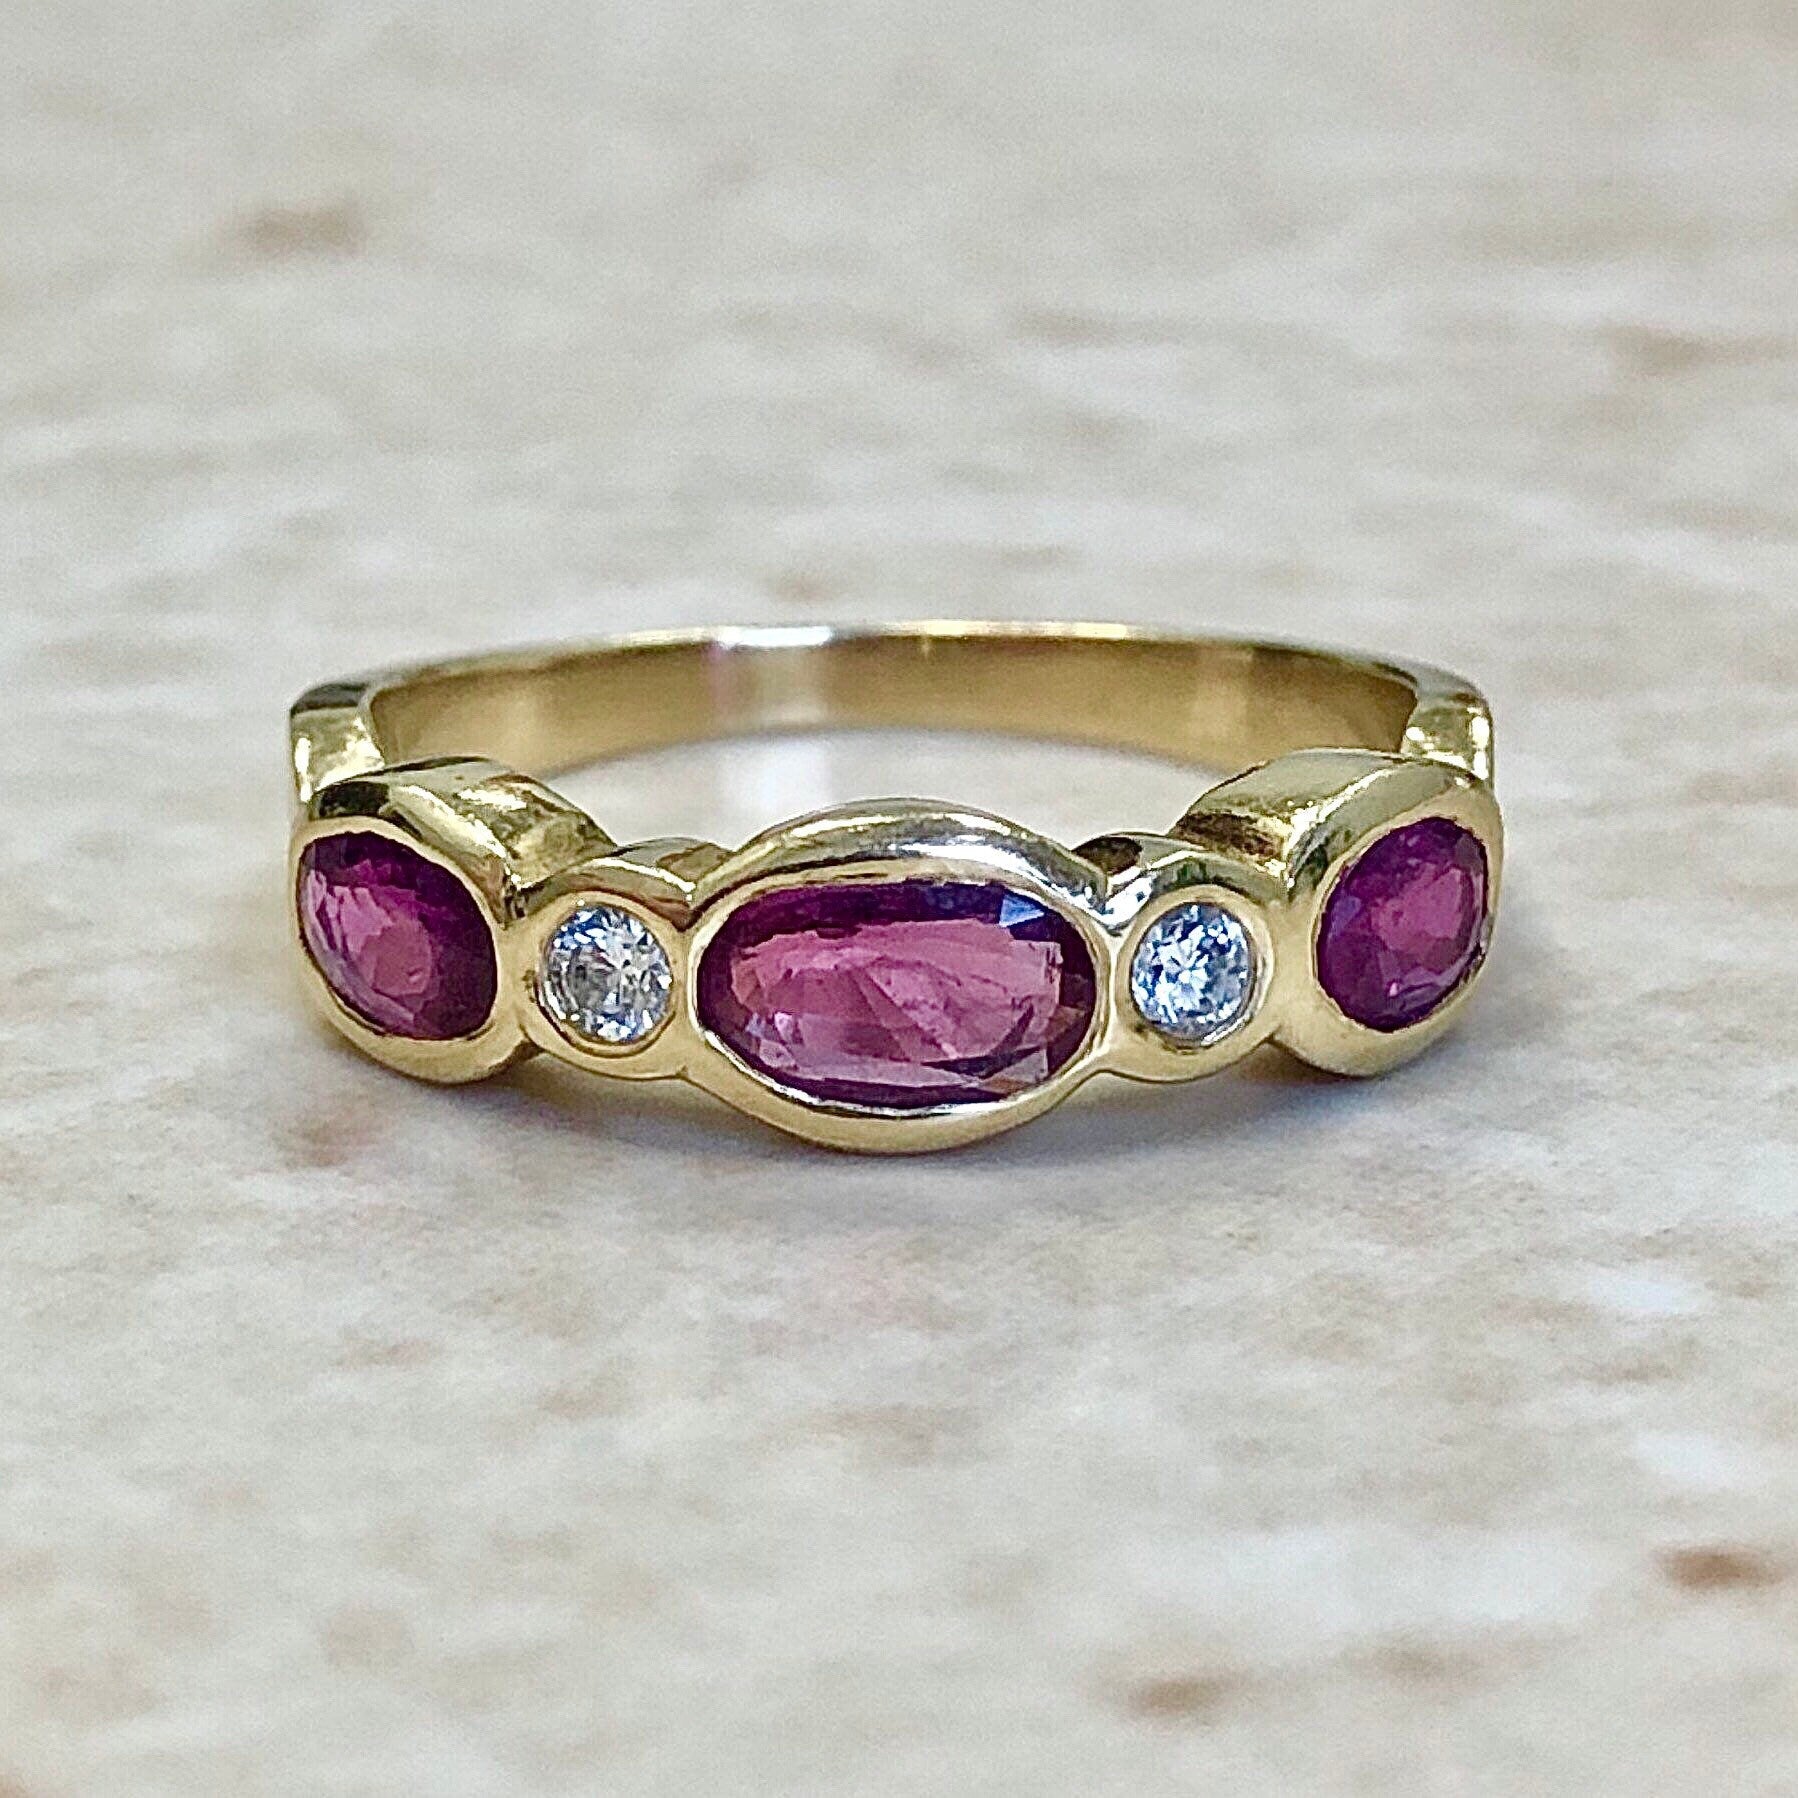 Fine Vintage Ruby & Diamond Ring - 18 Karat Yellow Gold - Cocktail Ring - Ruby Ring - July Birthstone - Anniversary Ring - Size 6 1/2